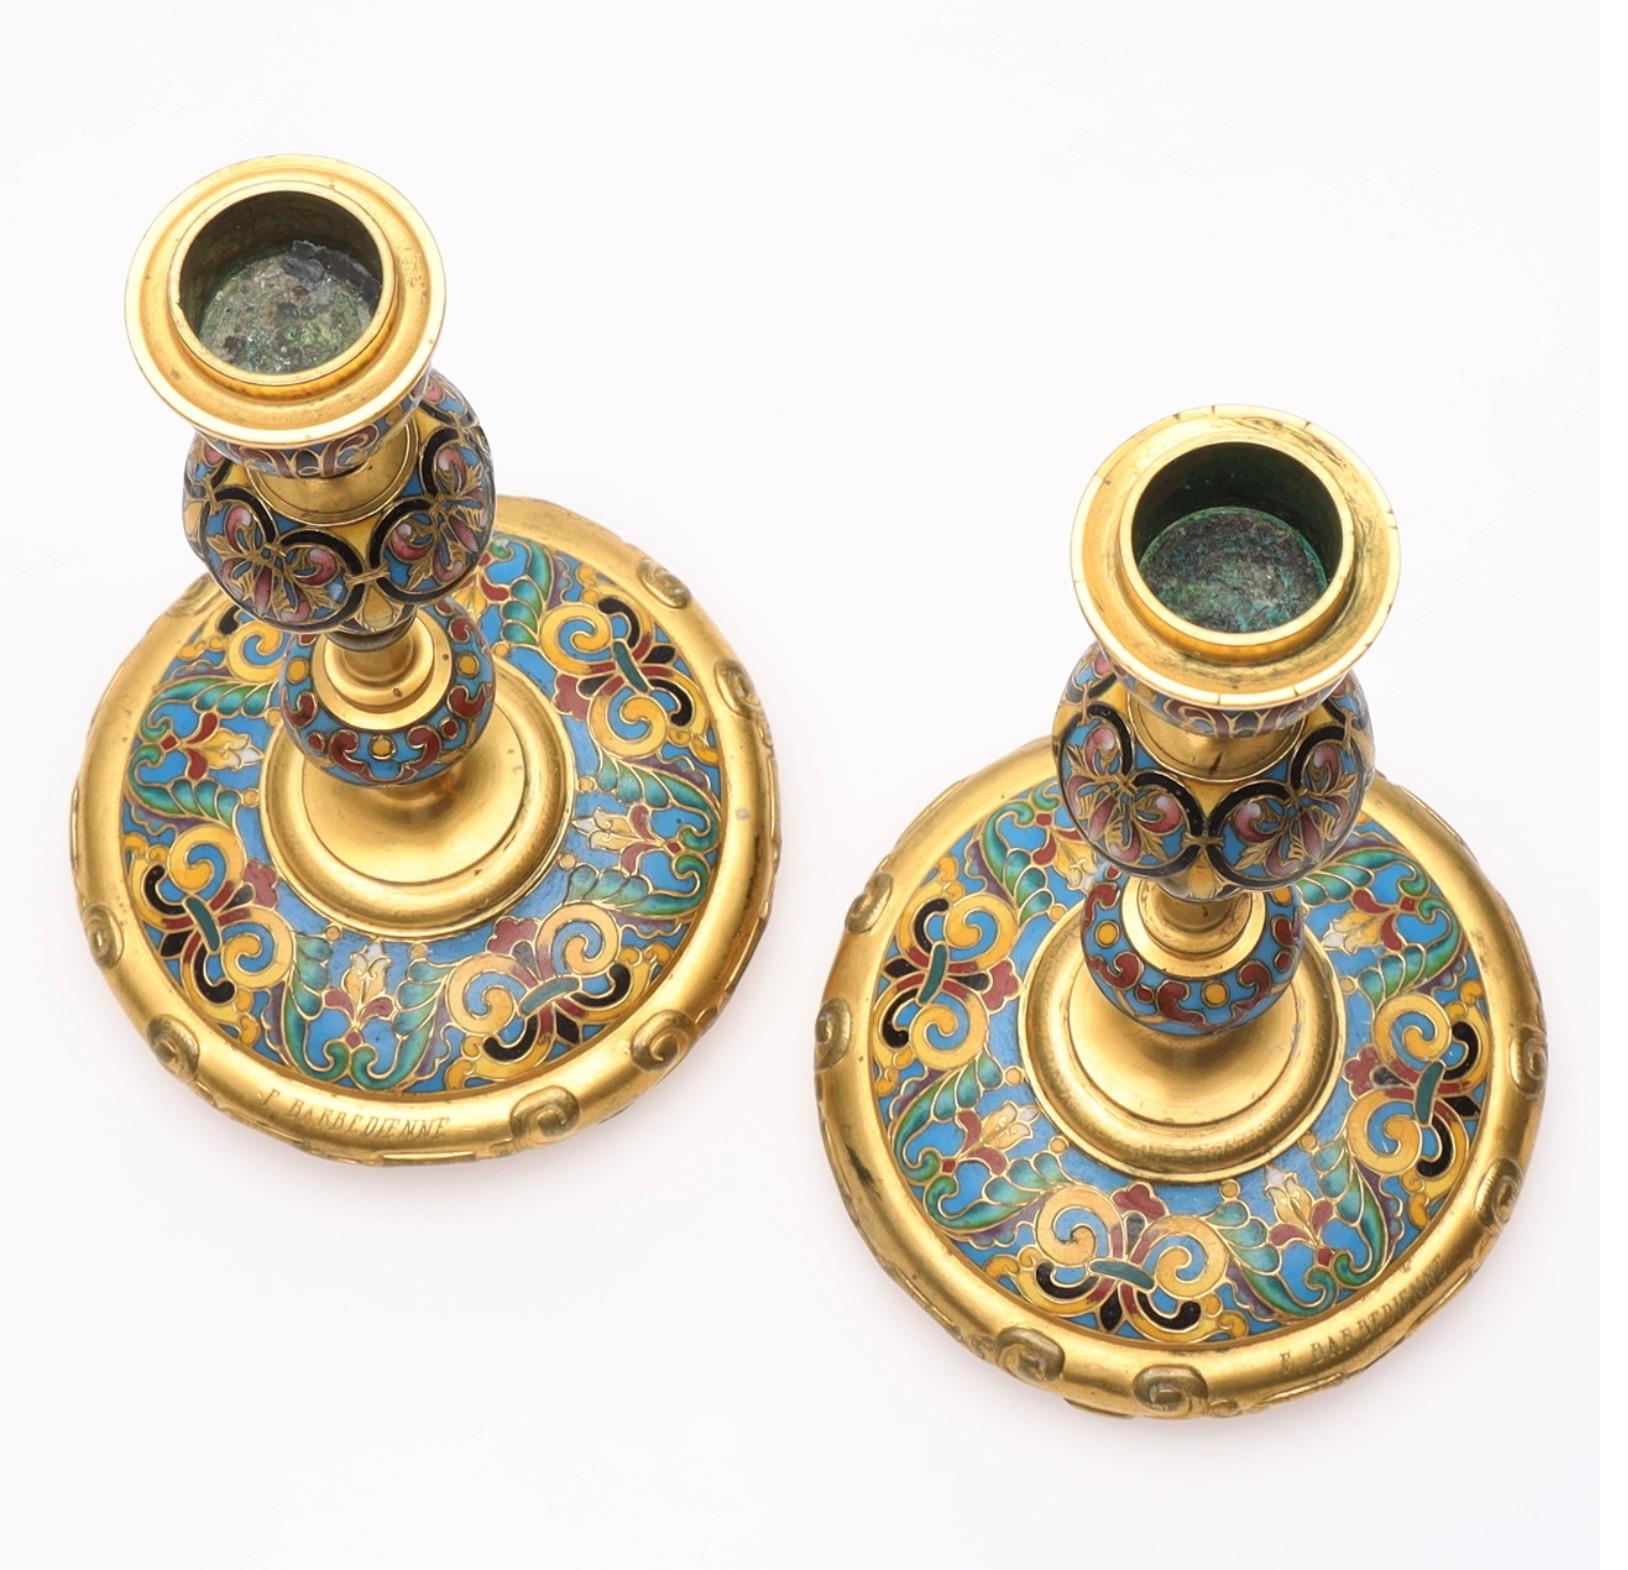 A fine pair of champlevé enamel candlesticks in a chinoiserie style by Ferdinand Barbedienne (1810 - 1892), made in Paris ca.1880. Signed 